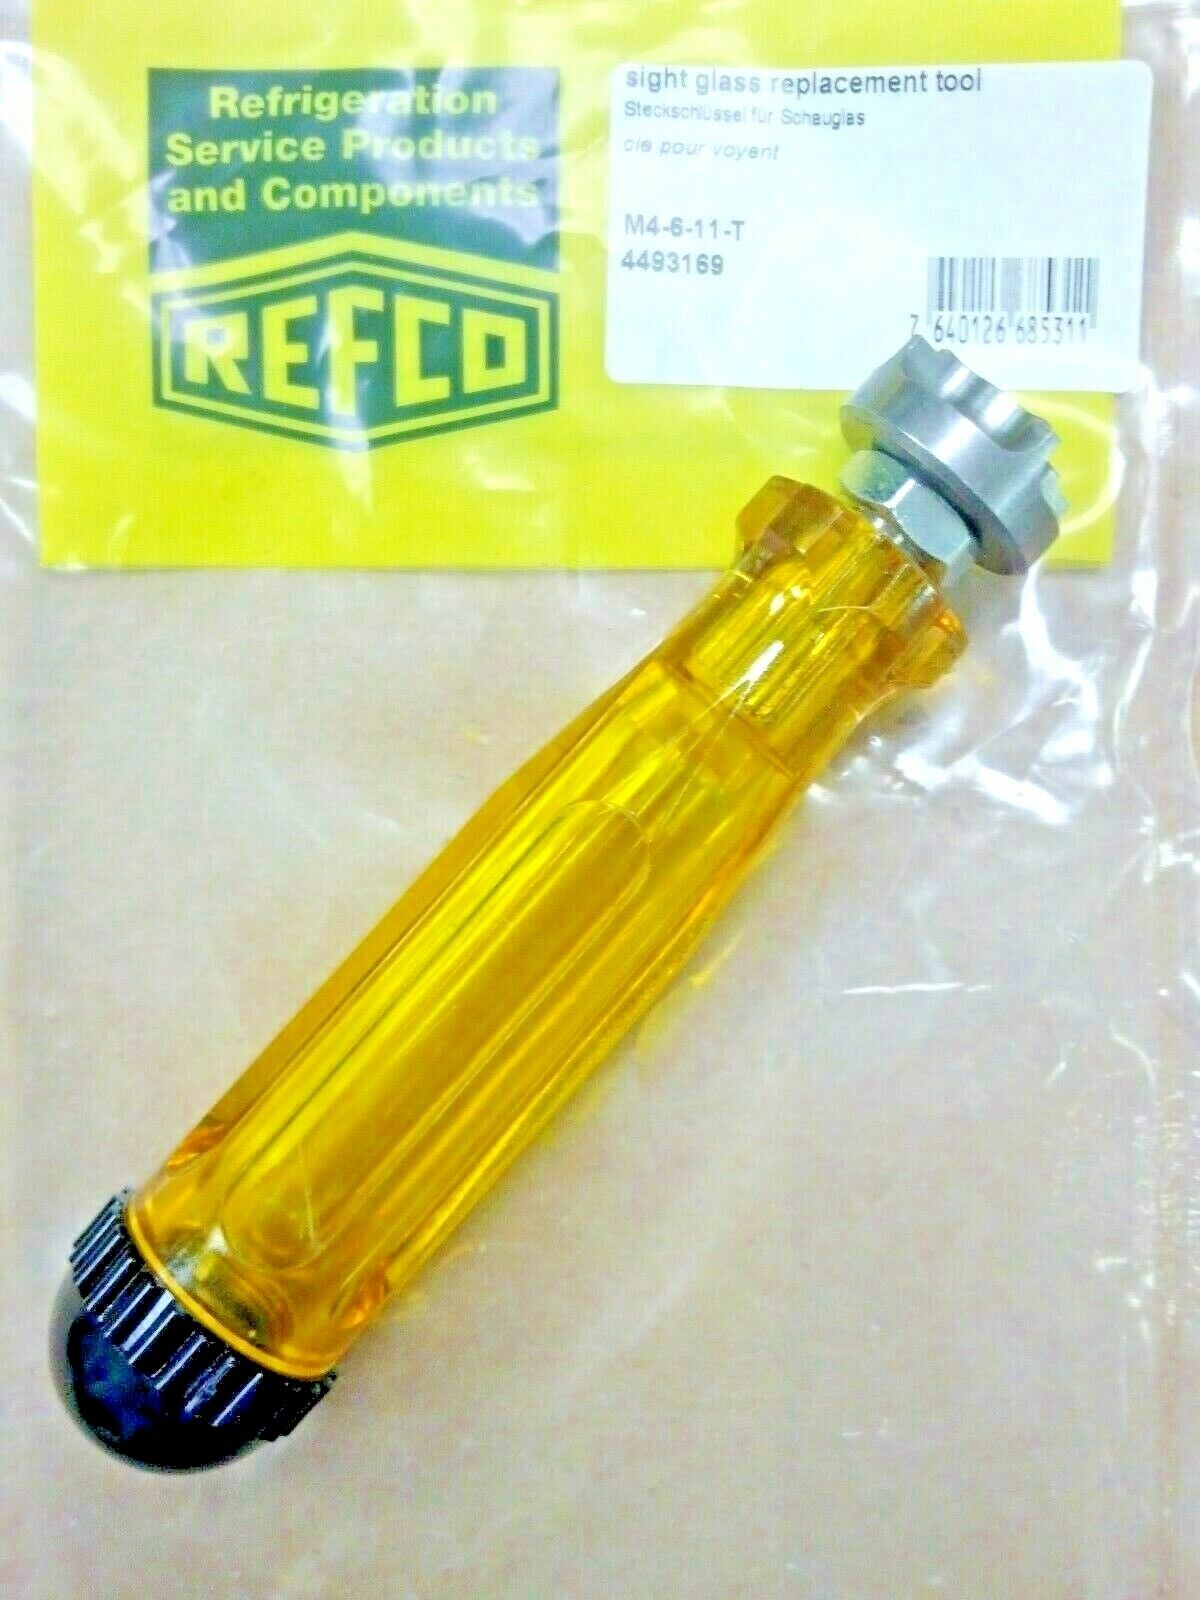 REFCO, SIGHT GLASS REPLACEMENT TOOL, REFRIGERATION GAUGE TOOL, PART# M4-6-11-T